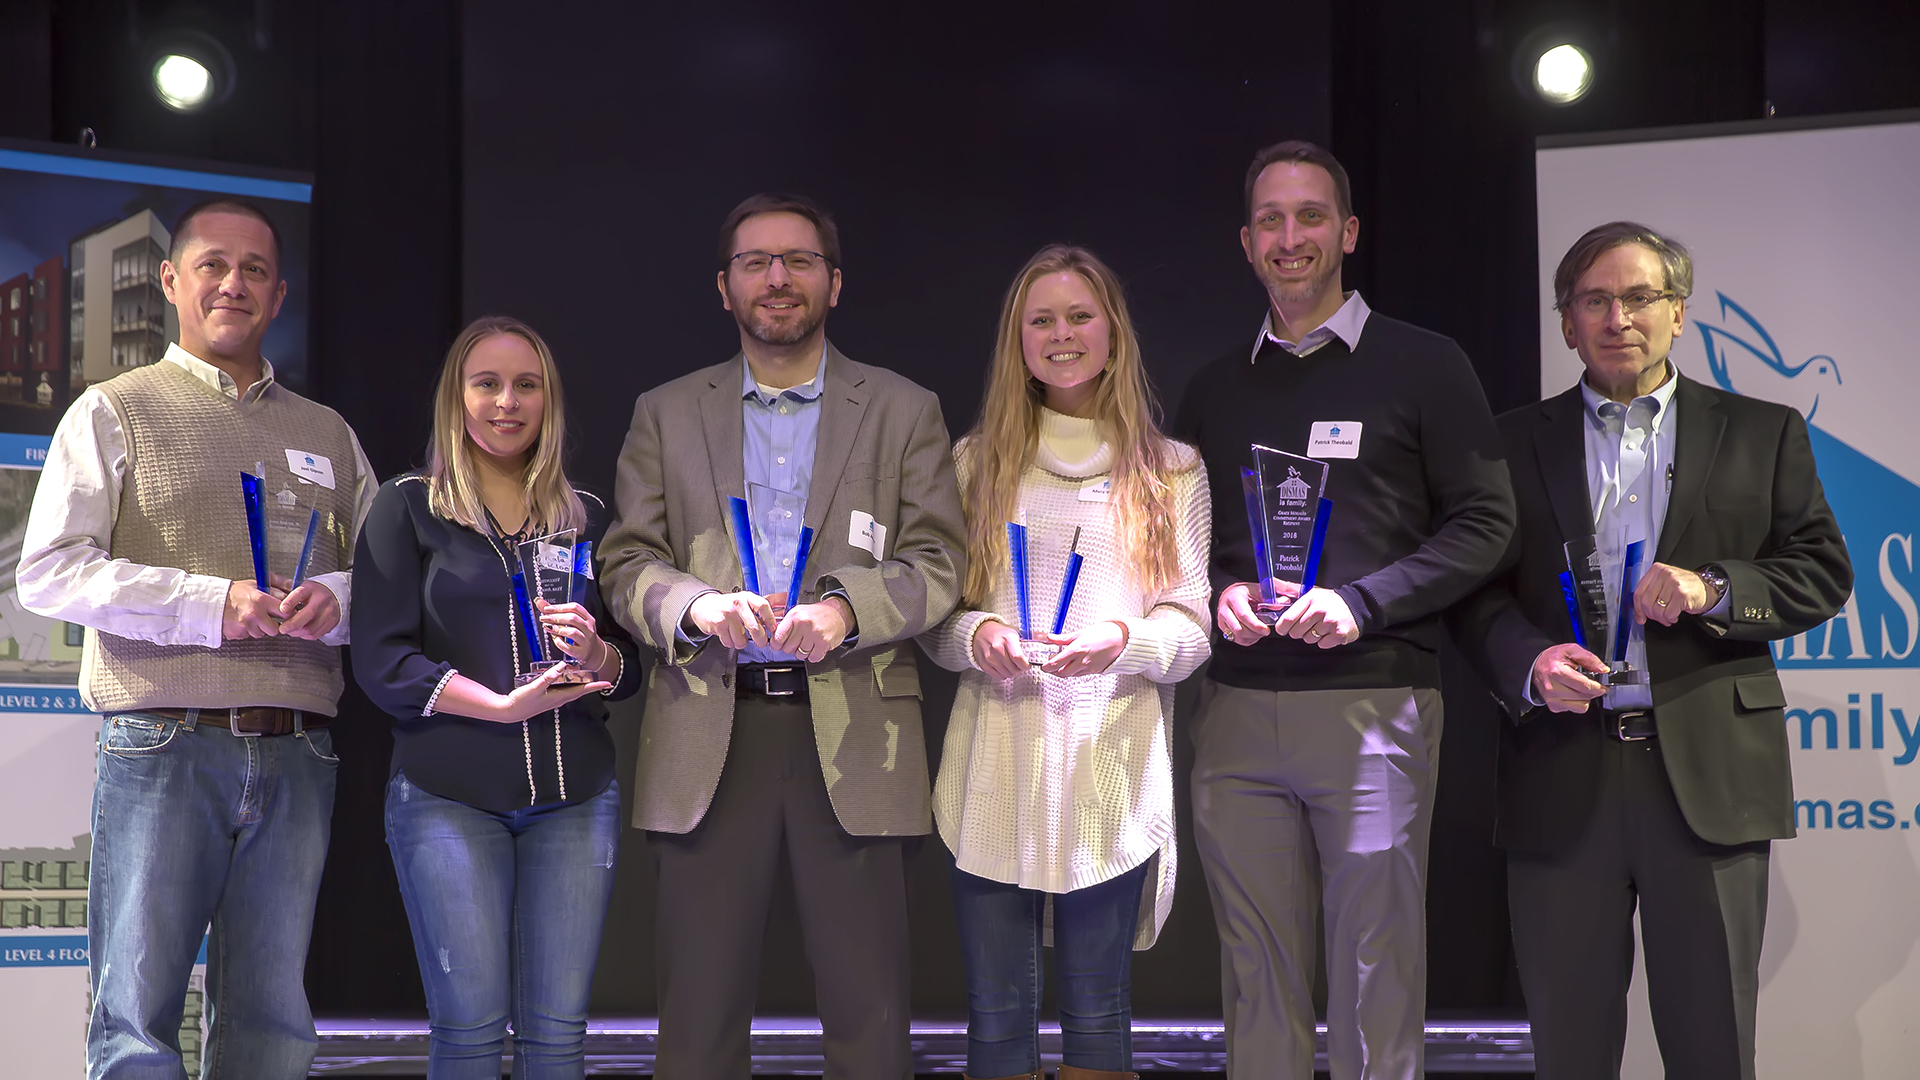 Six individuals standing together with volunteer appreciation awards